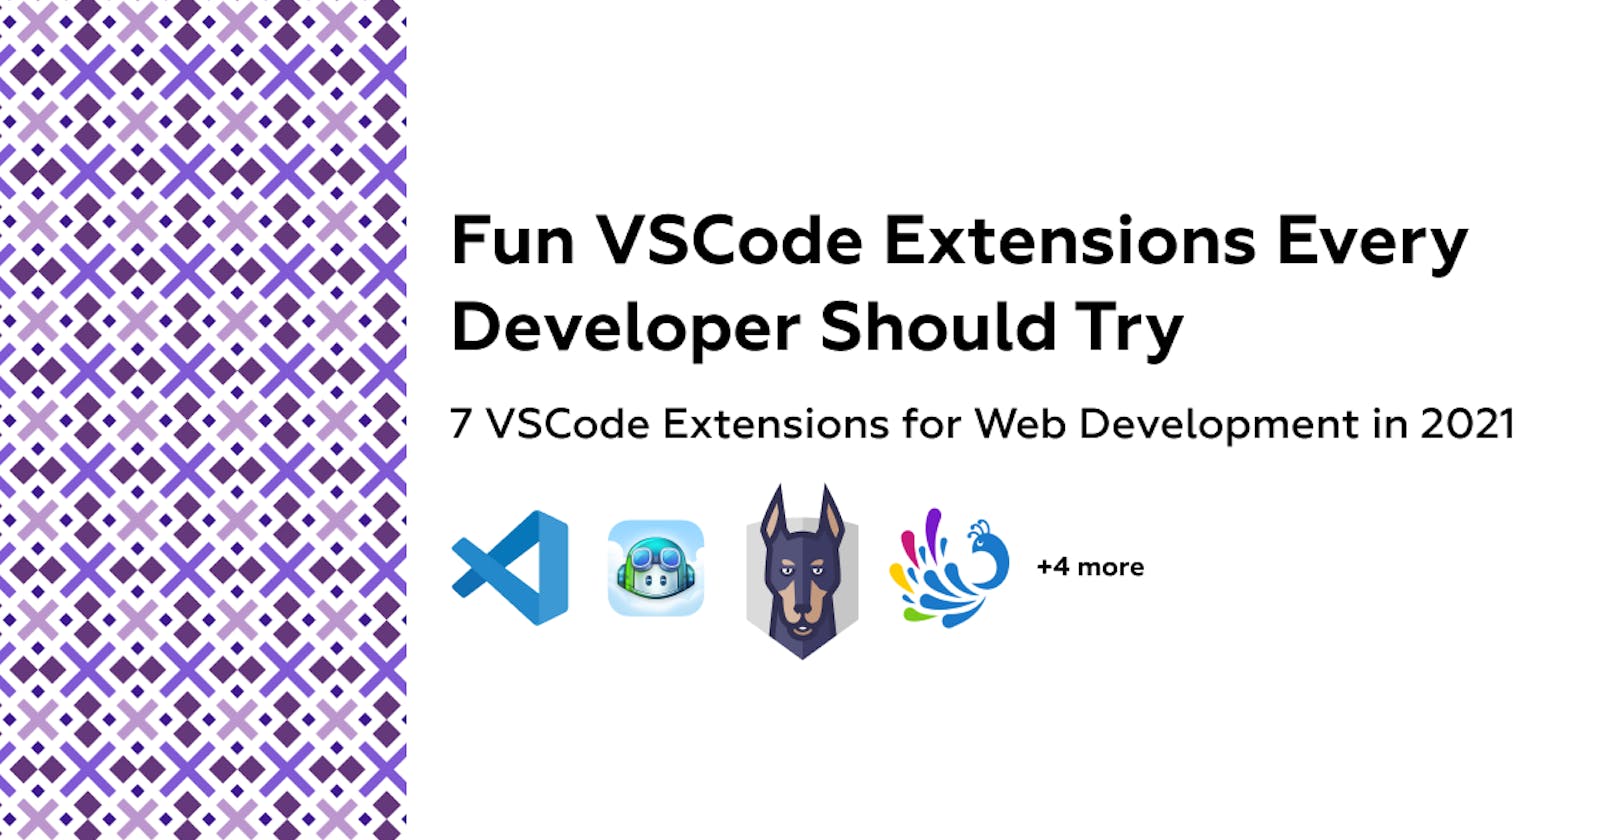 Fun VSCode Extensions Every Developer Should Try